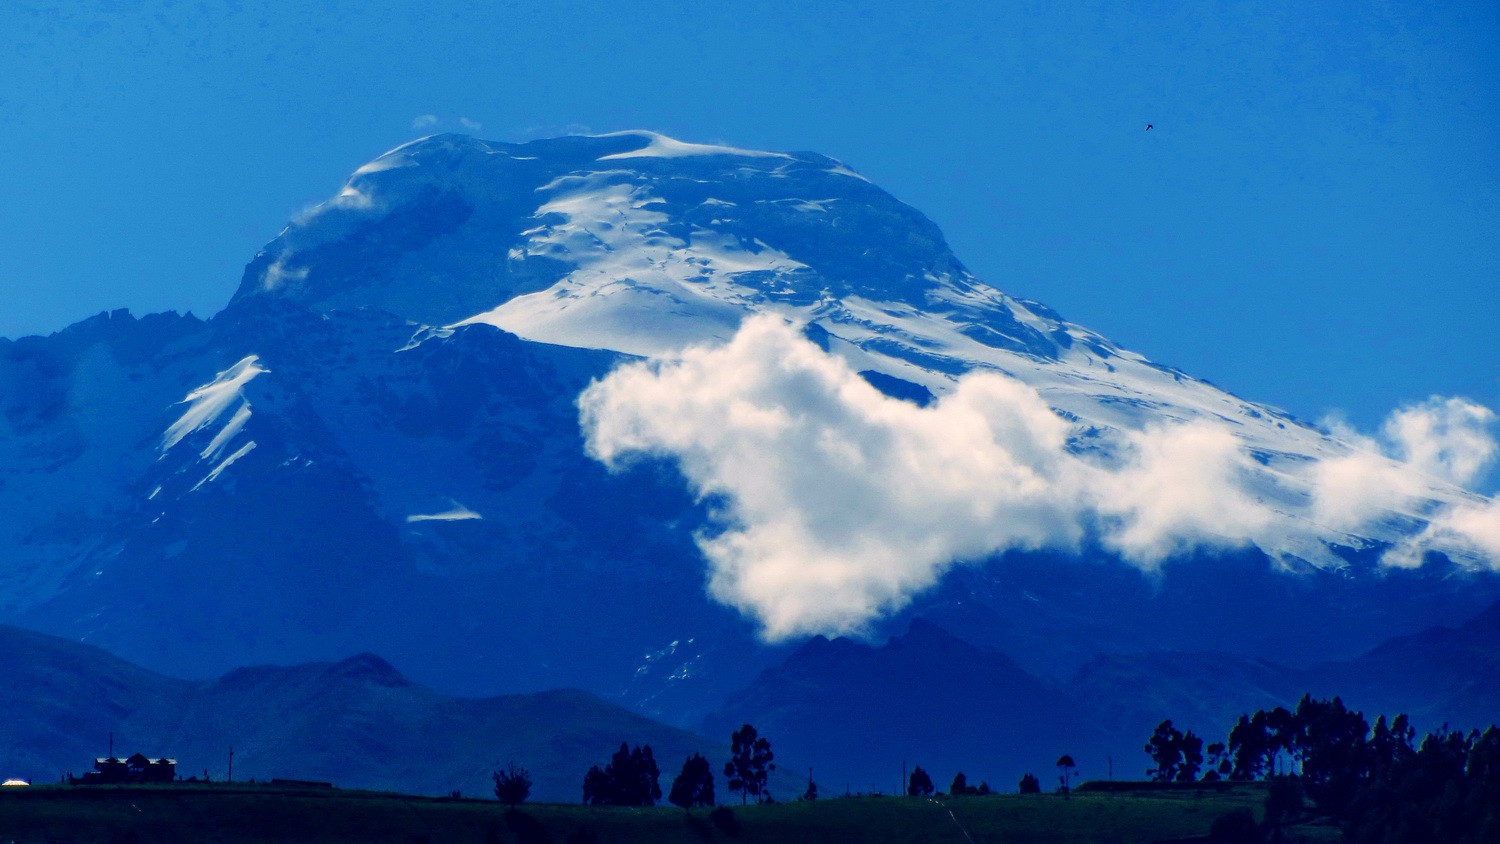 Volcan Cayambe seen from the village Cayambe